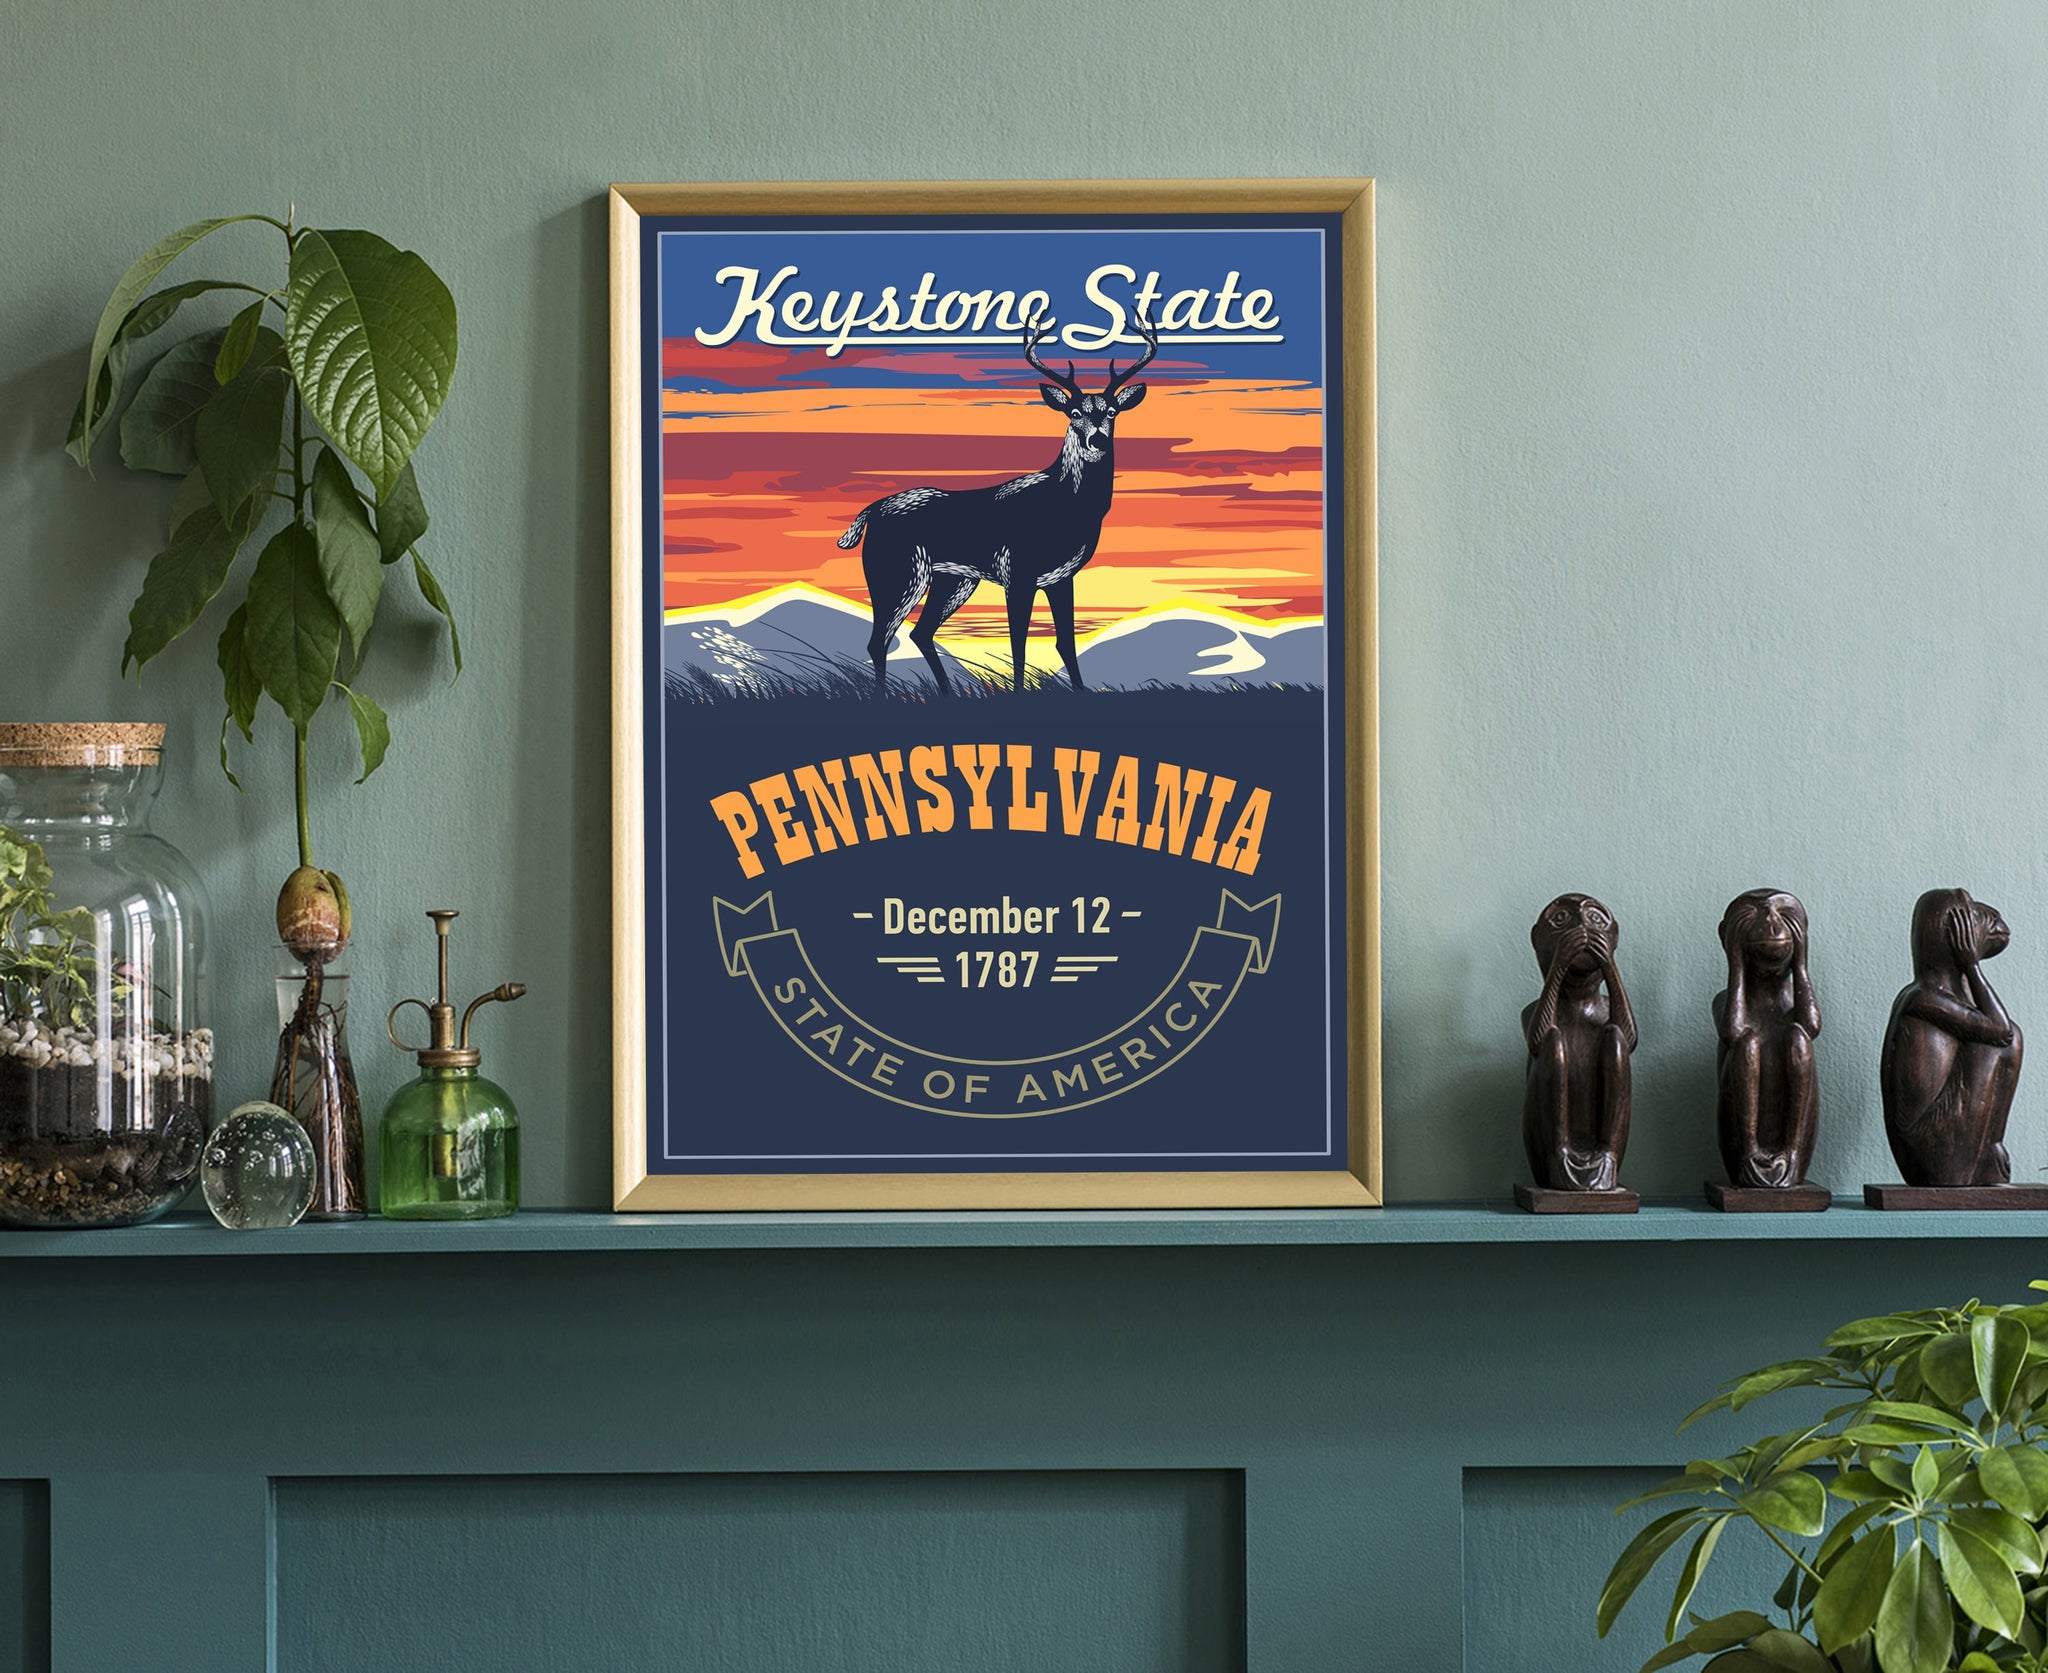 United States Poster, Pennsylvania State Poster Print, Pennsylvania State Emblem Poster, Retro Travel State Poster, Home Office Wall Art